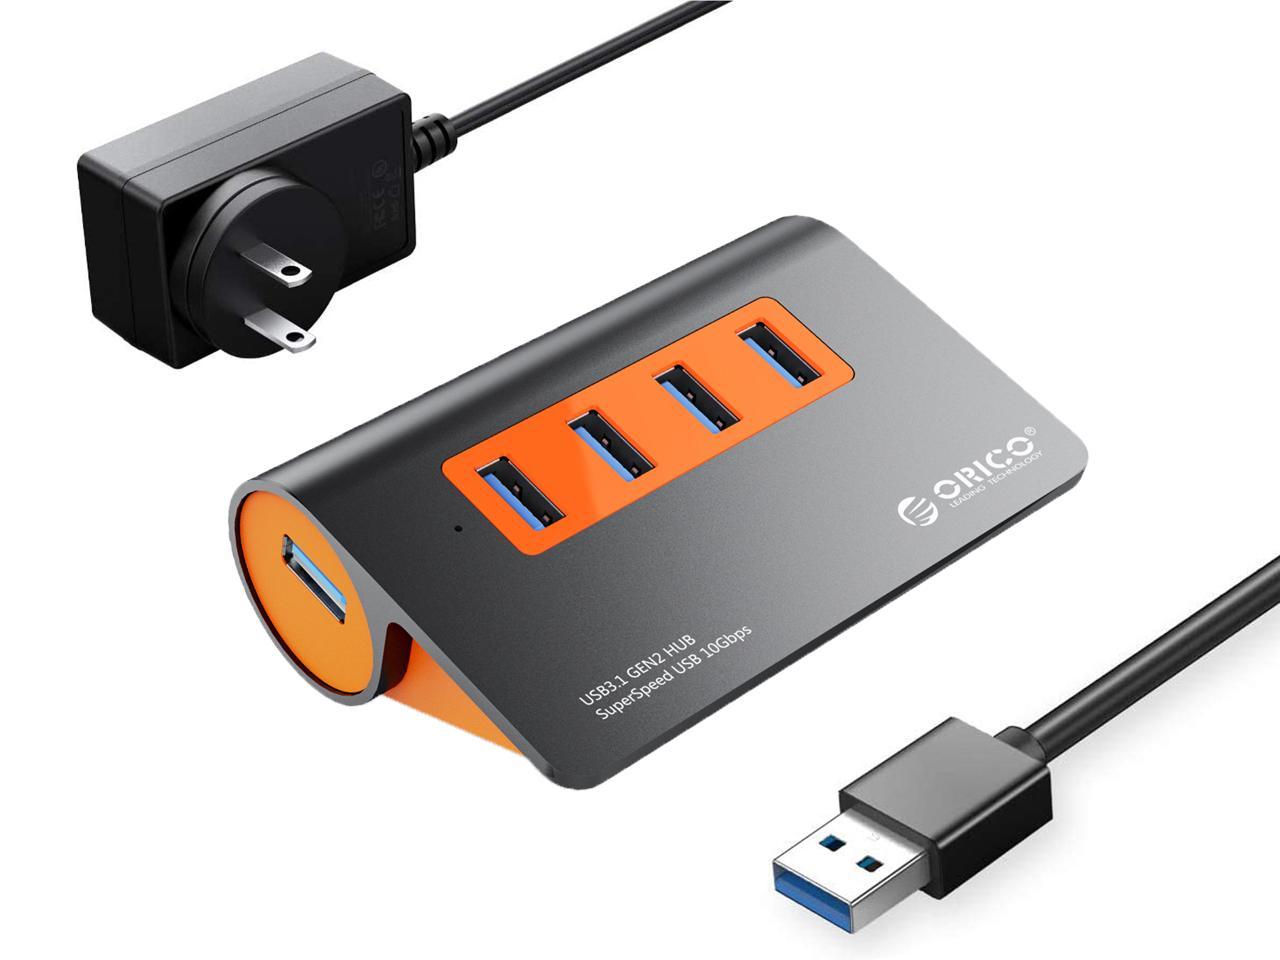 ORICO Powered USB Hub, 4 Ports Powered USB 3.1 Aluminum Data Hub, 10 Gbps SuperSpeed USB with Power Adapter for Desktop PC/Laptop, Phones, and More - Newegg.com